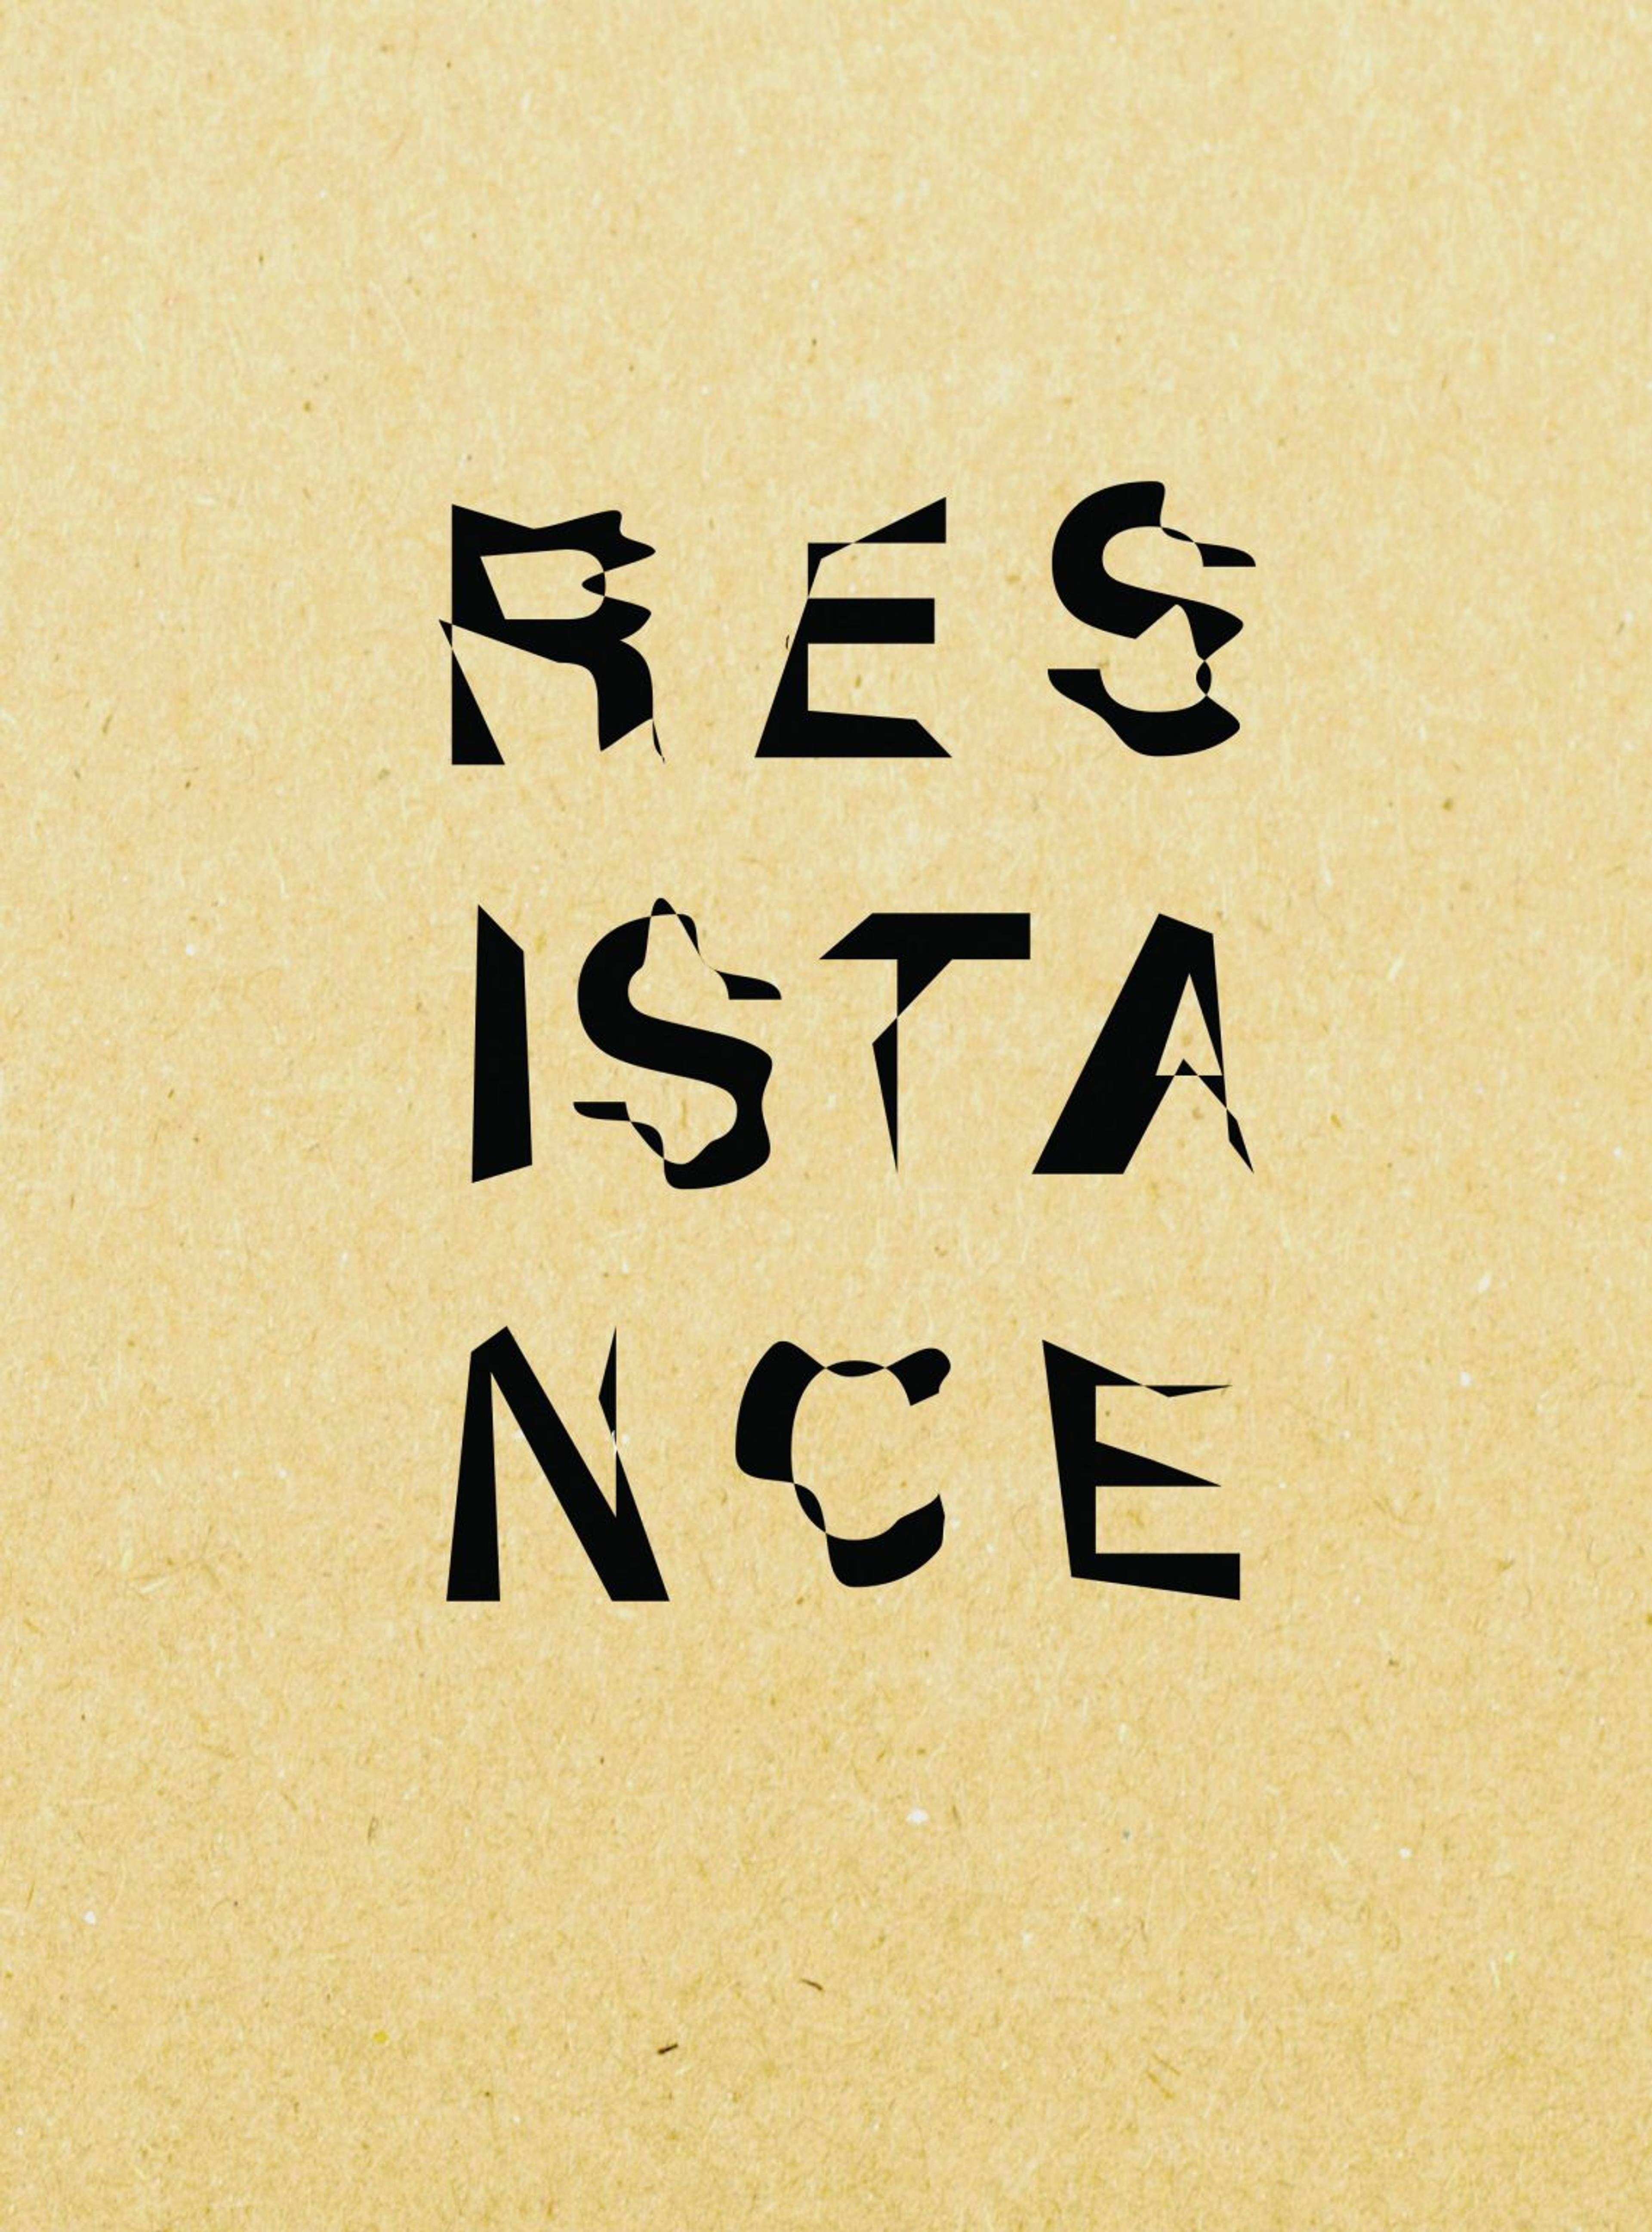 Cover of book titled RESISTANCE